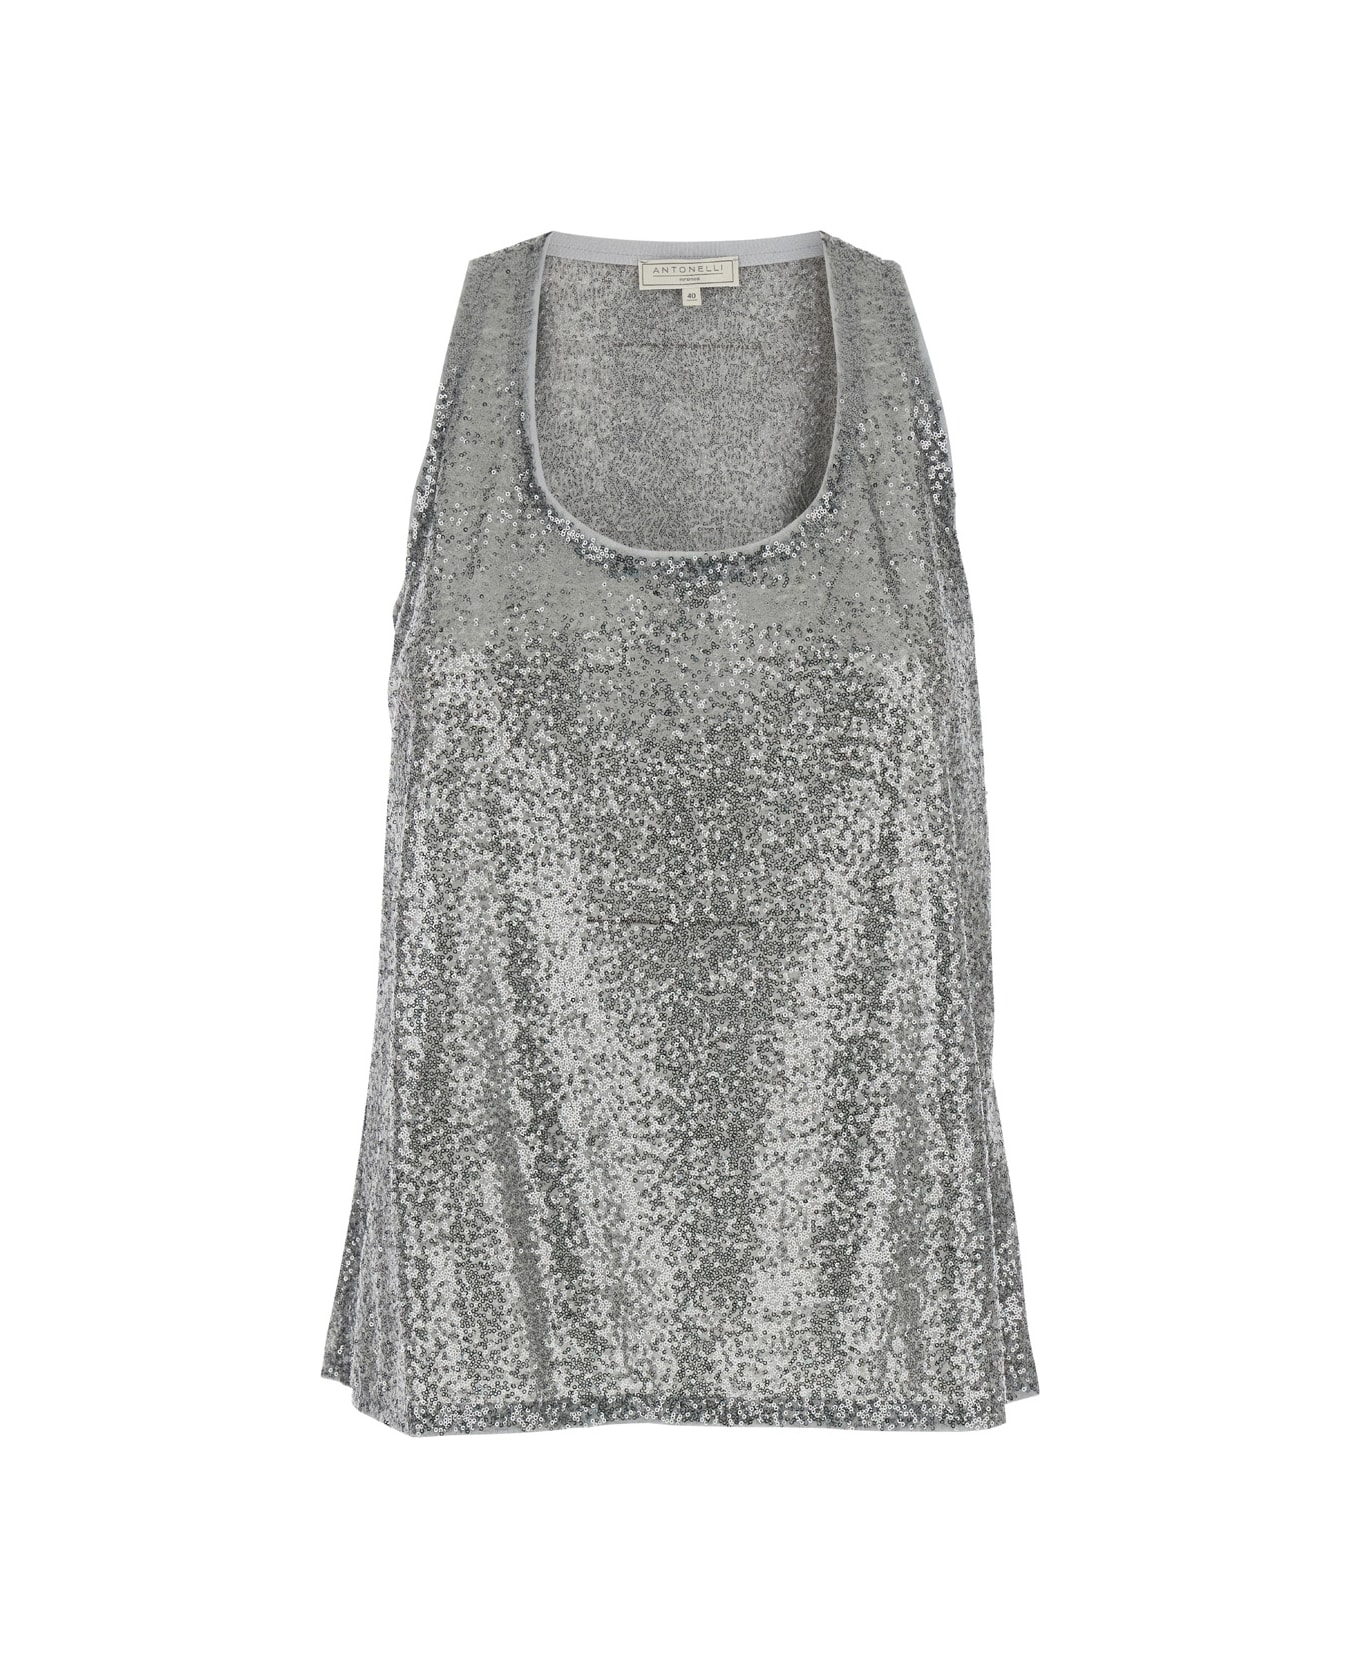 Antonelli Silver Top With Sequins In Techno Fabric Woman - Metallic